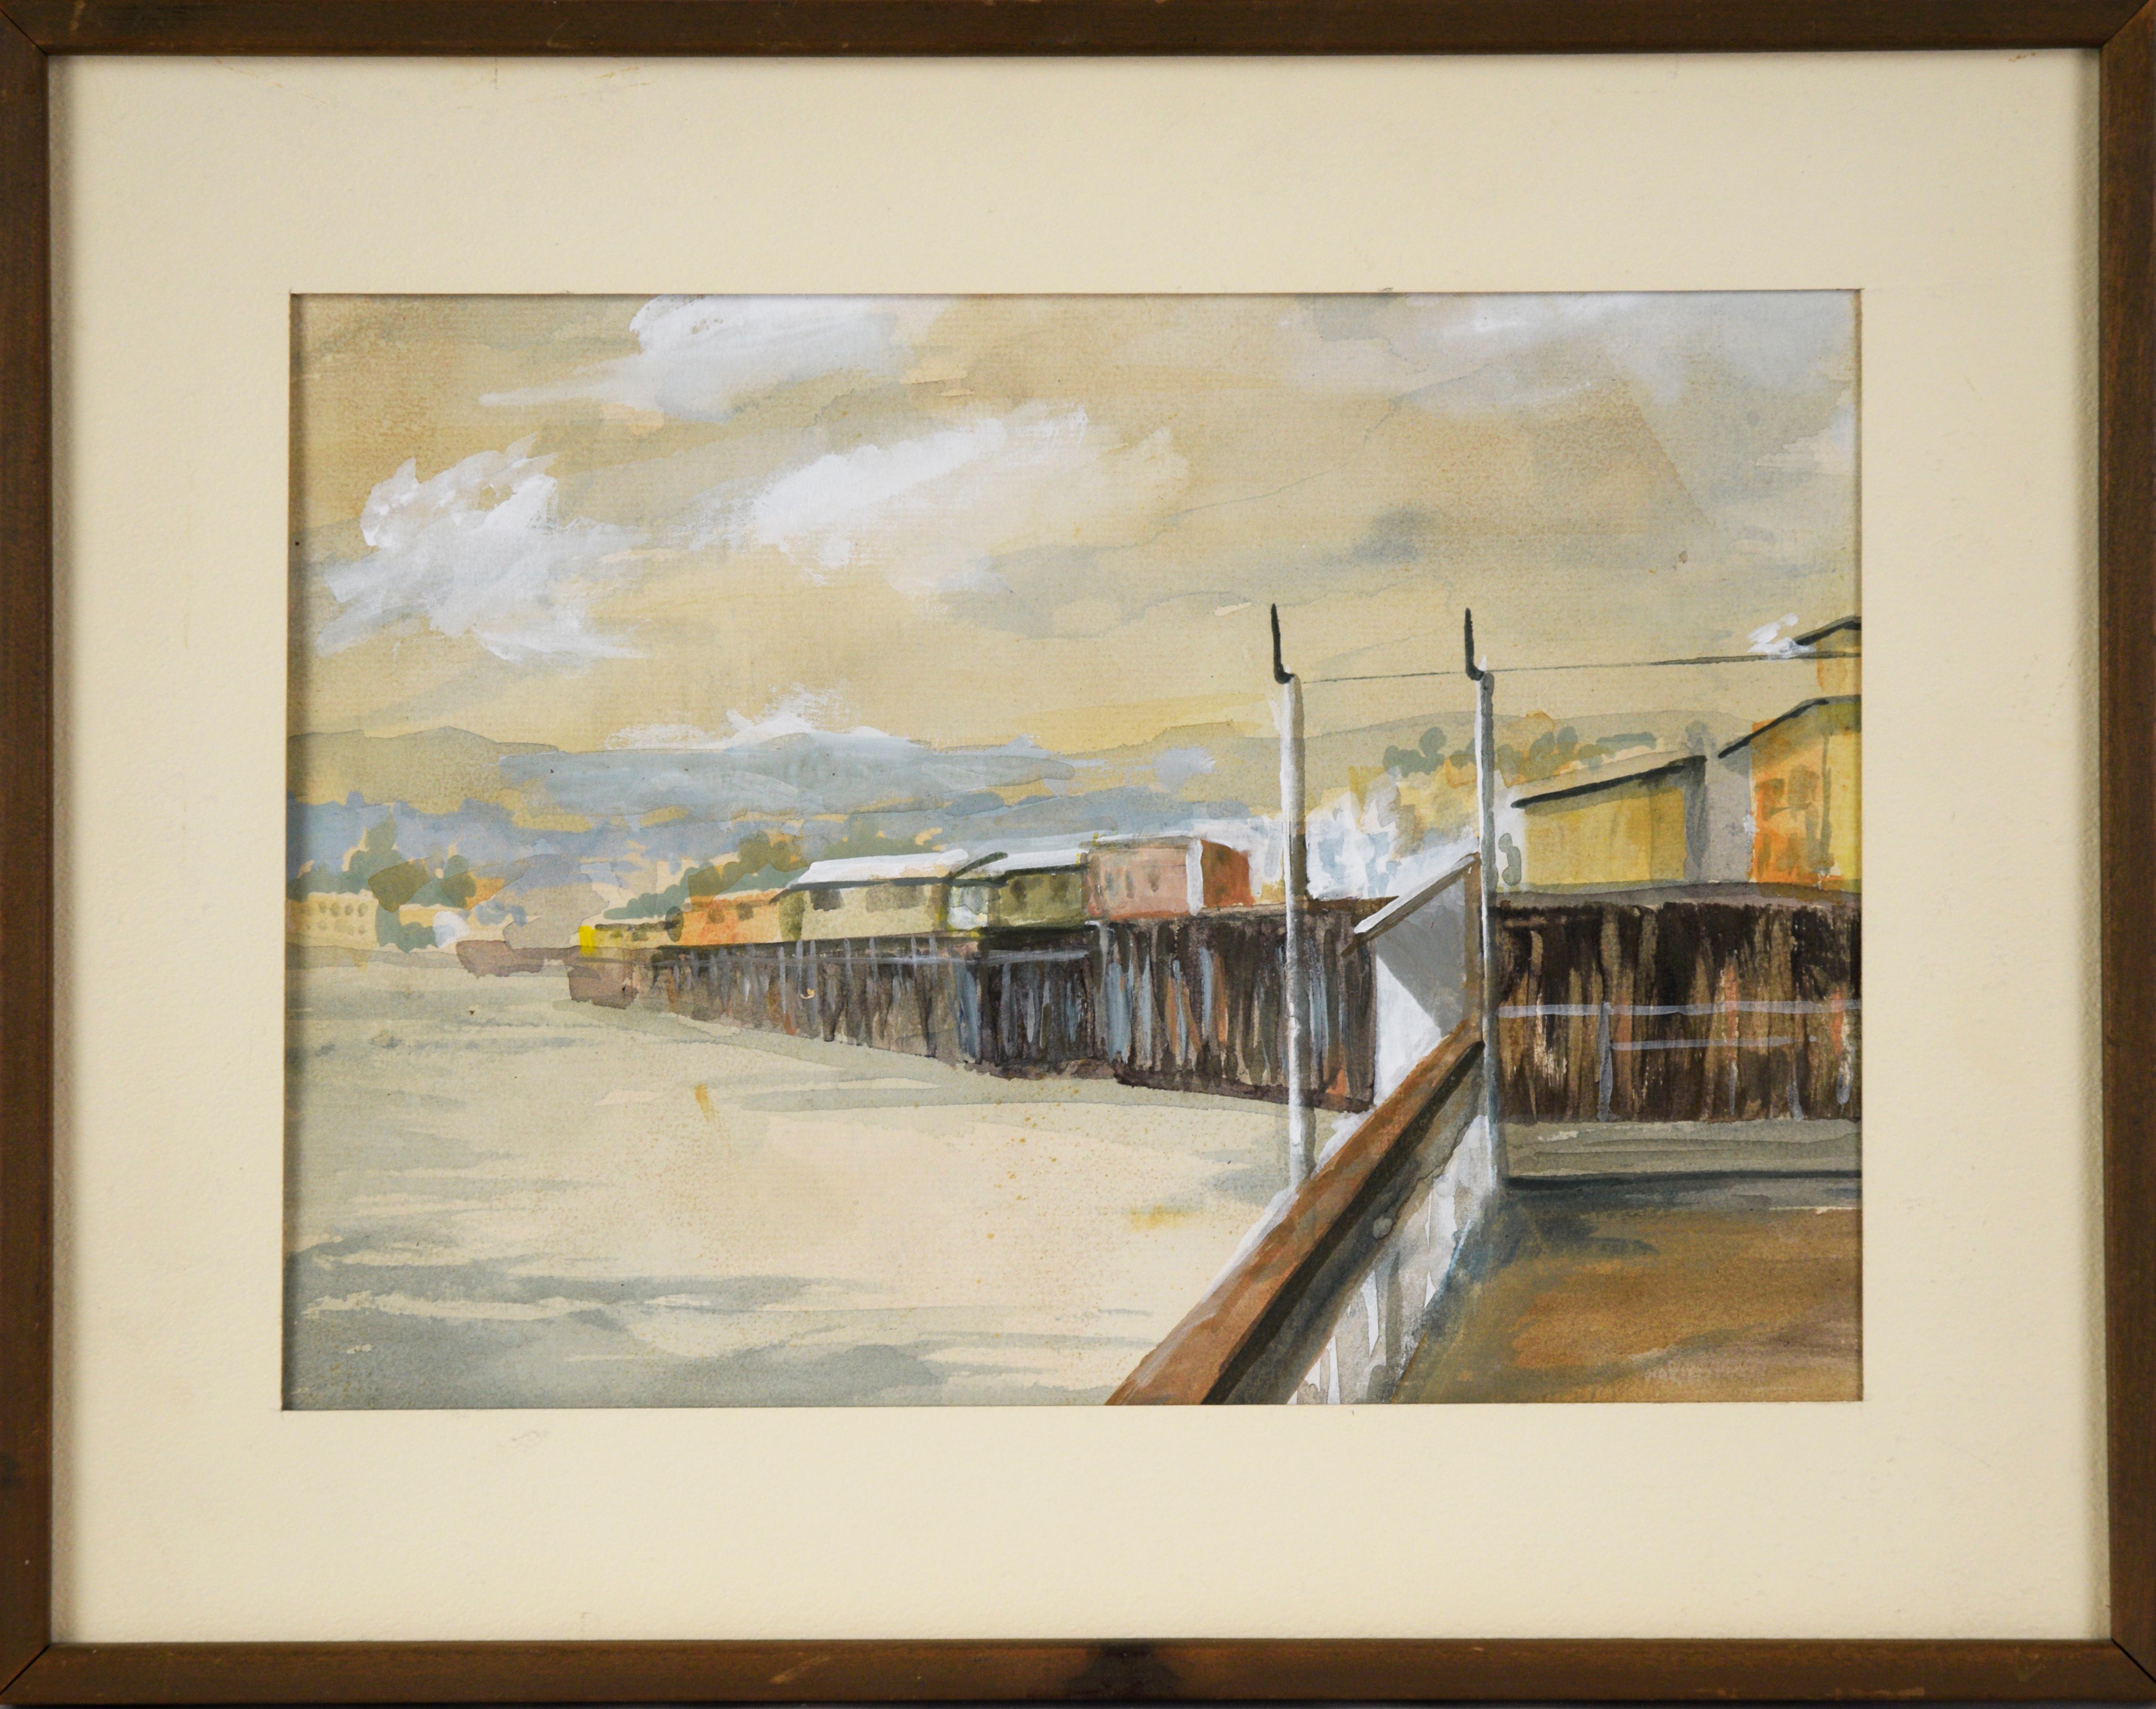 Beautiful watercolor painting depicting a side view of the Santa Cruz Wharf by Beth Teall Wilkins (American, 1906-1992). Alice Elizabeth Teall (Beth T. Wilkins) was born in Moline, Illinois in 1906 where she resided until 1928 when she married and